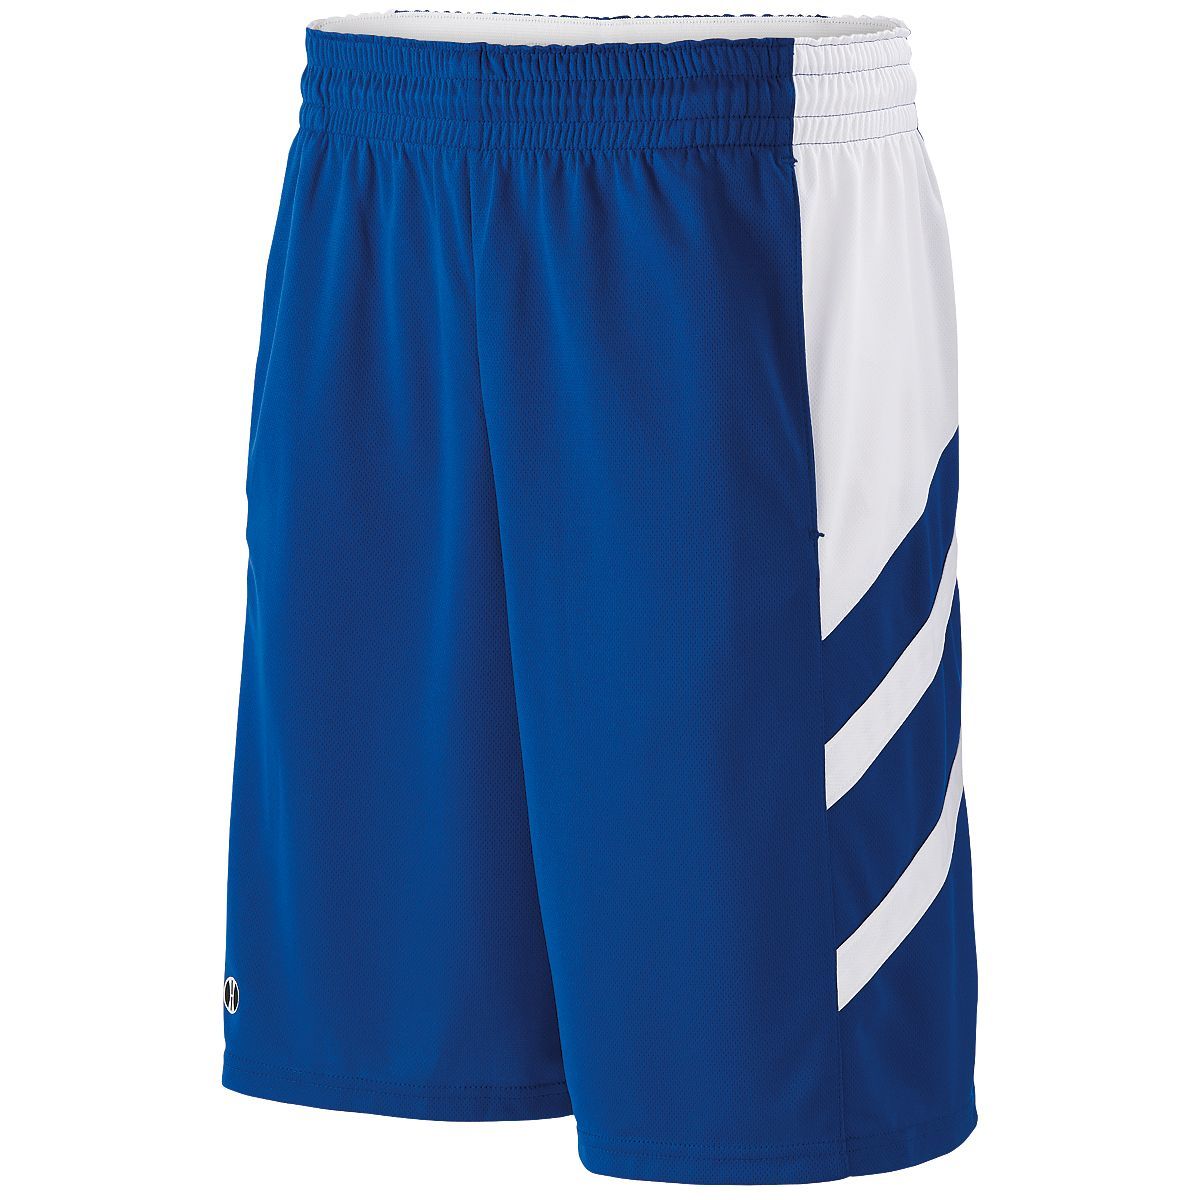 Holloway Helium Shorts in Royal/White  -Part of the Adult, Adult-Shorts, Holloway product lines at KanaleyCreations.com